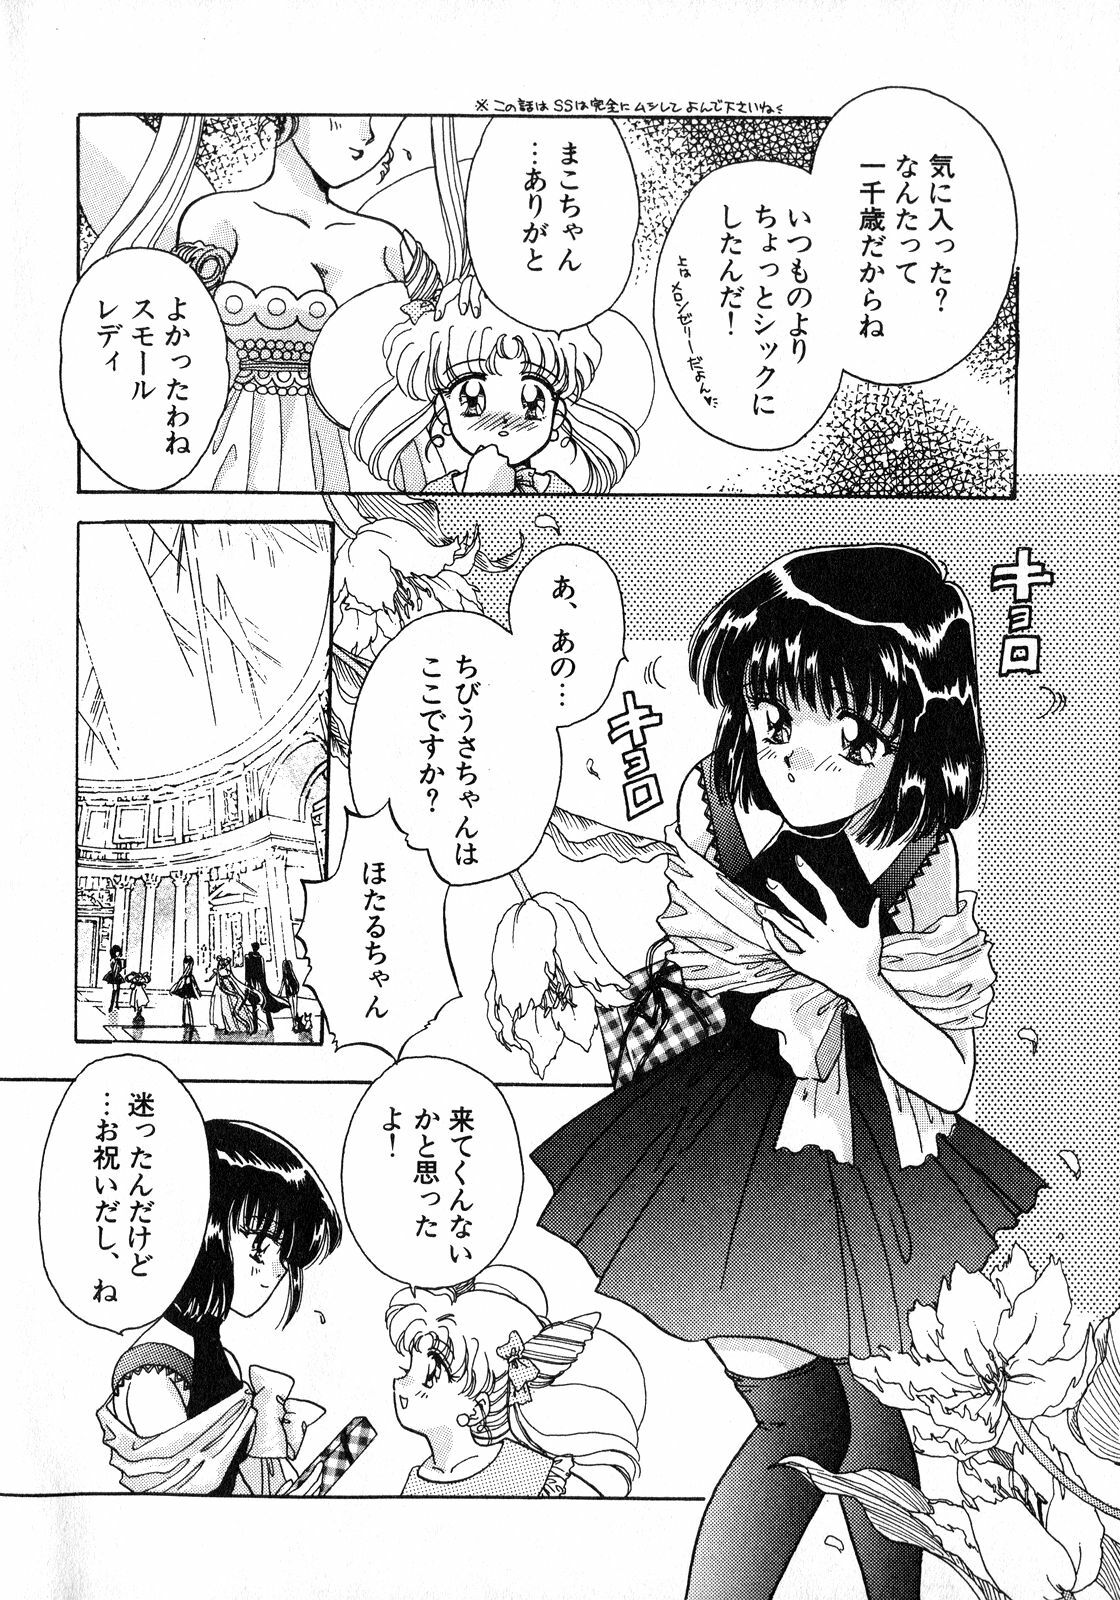 [Anthology] Lunatic Party 8 (Sailor Moon) page 5 full